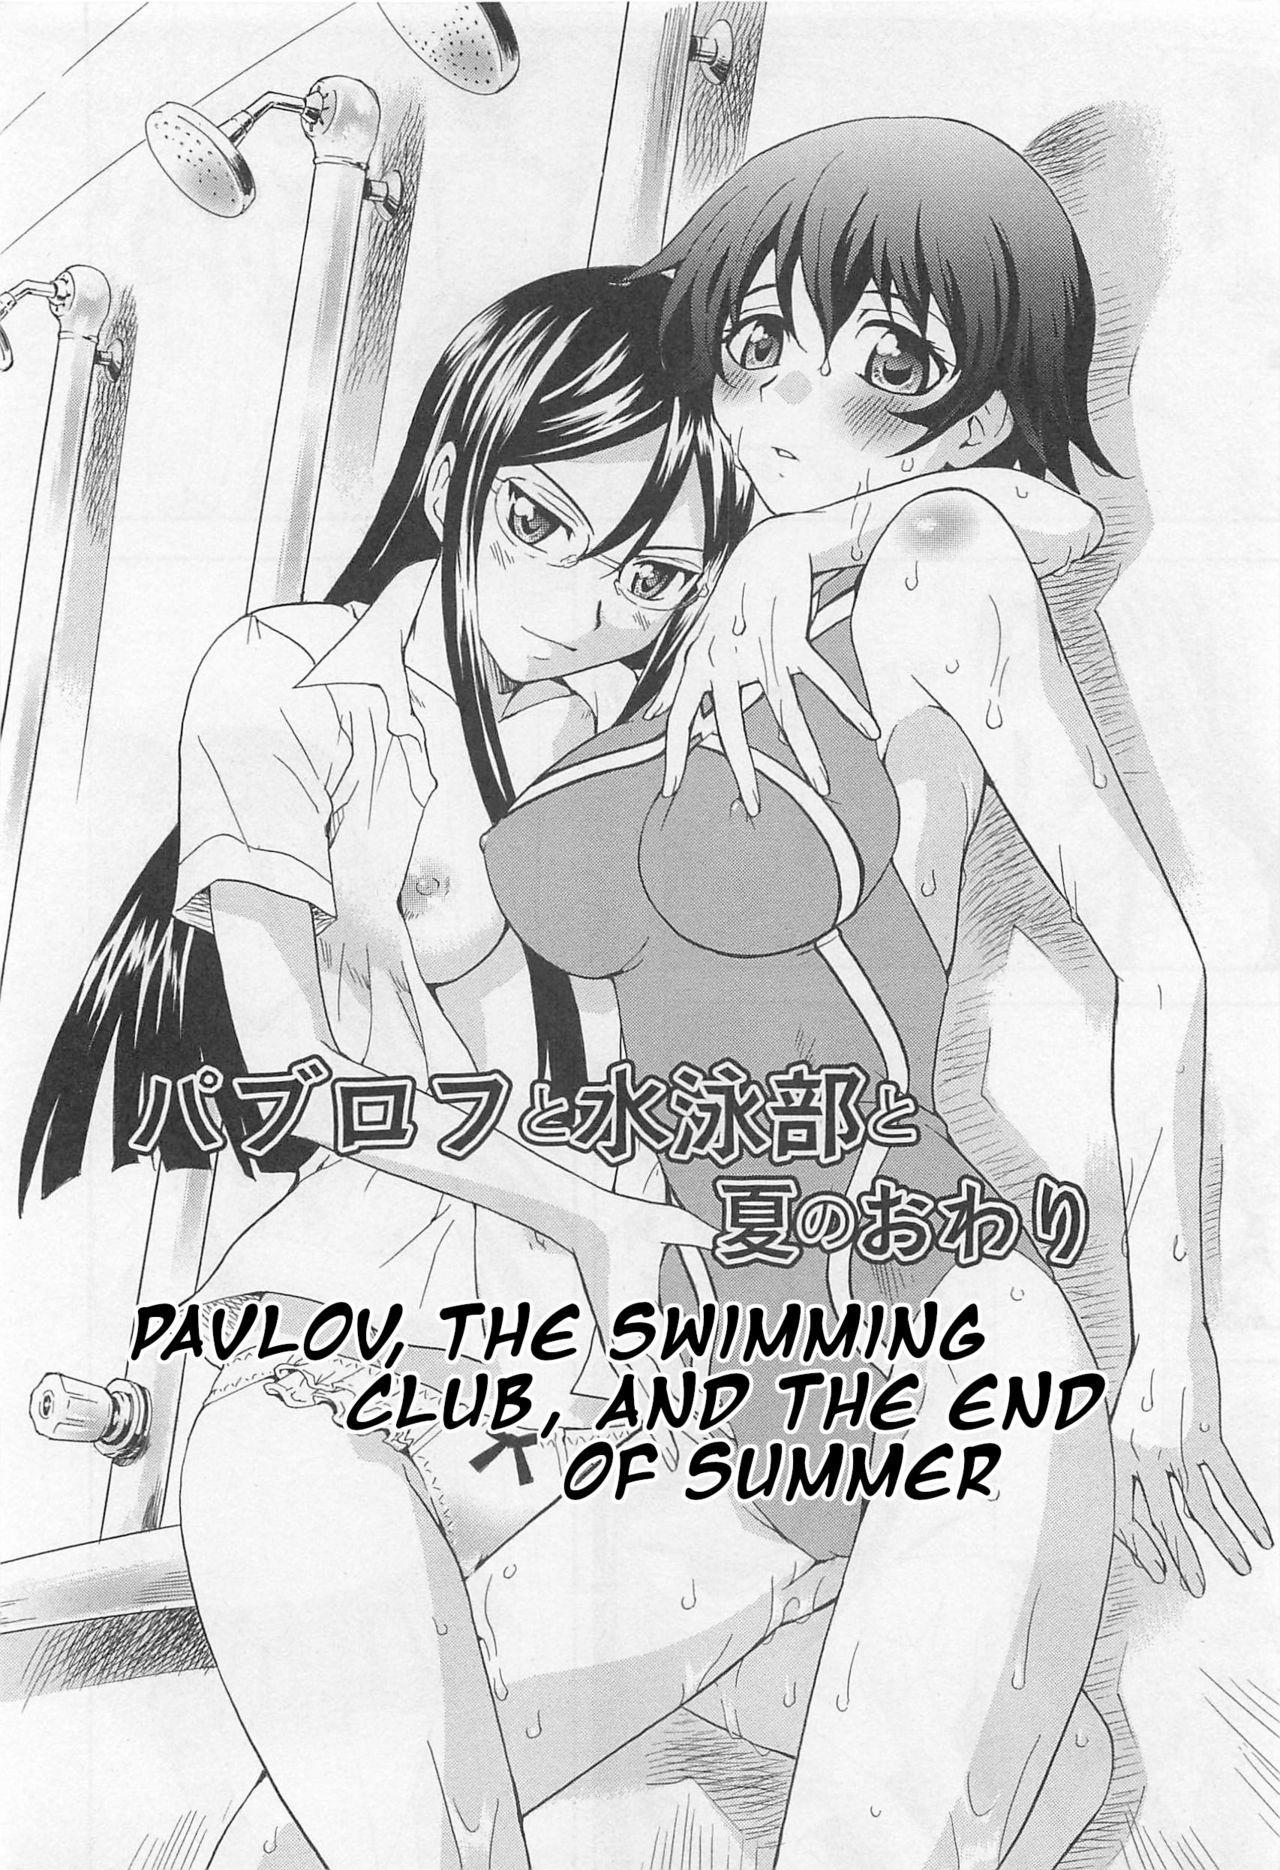 Chaturbate Pavlov, The Swimming Club, and the End of Summer Sexy Girl Sex - Page 2